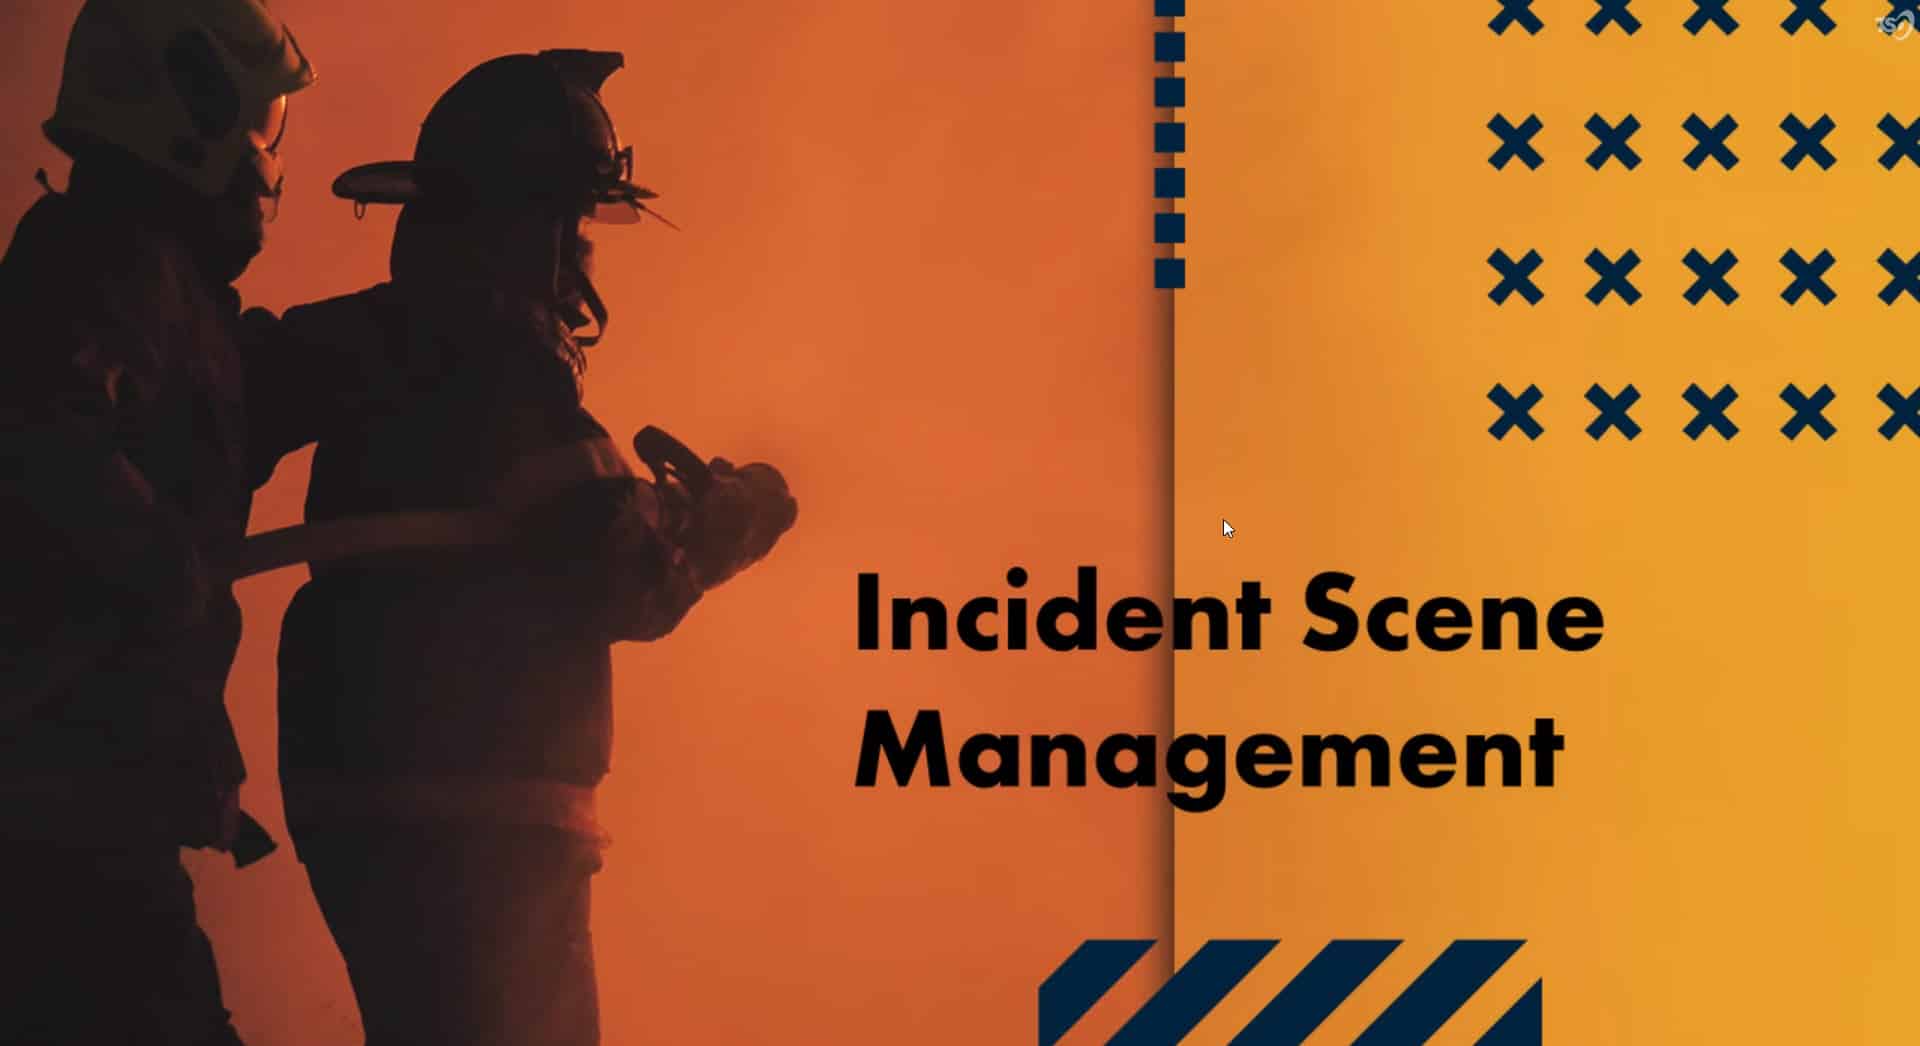 NFPA 1021 - Incident Scene Management online training course